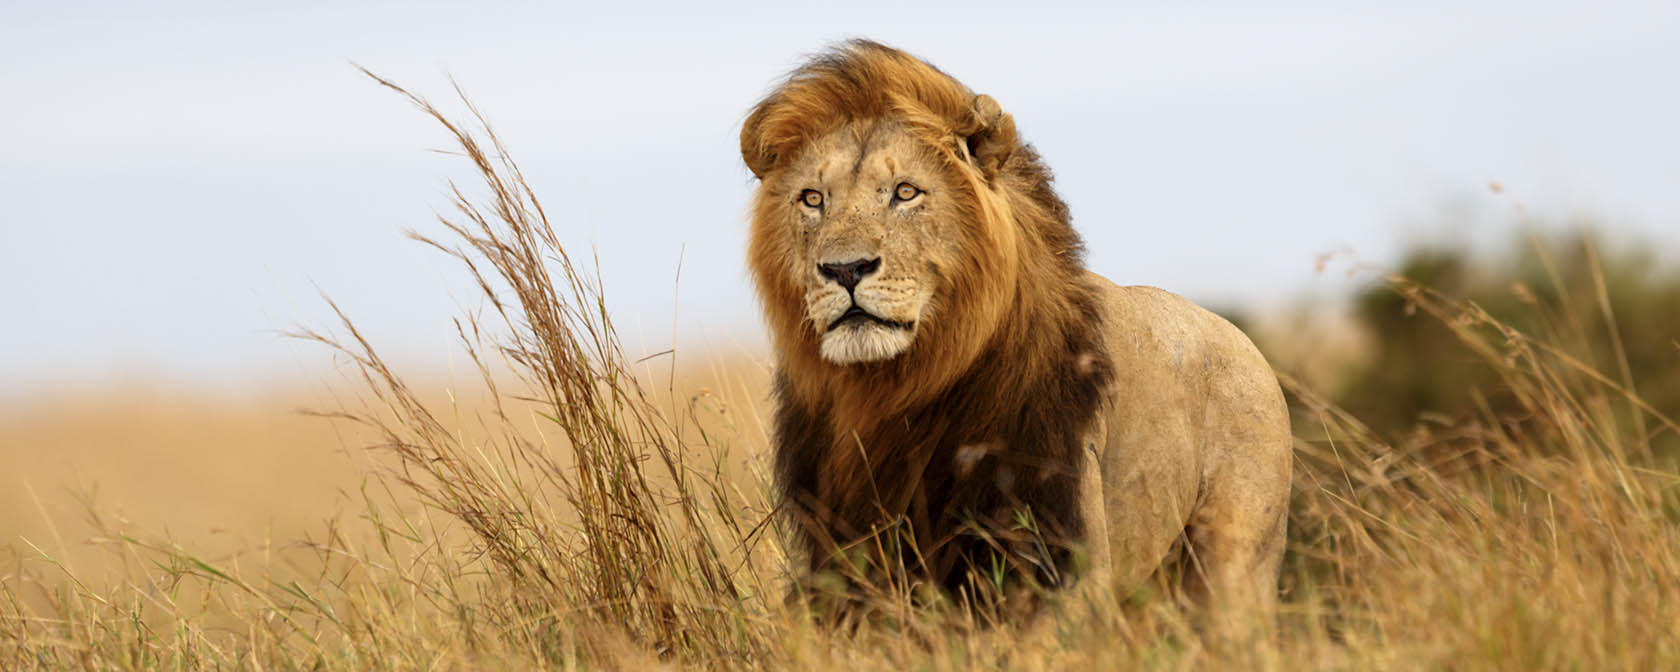 Has trophy hunting changed since the death of Cecil the lion? | HSLF